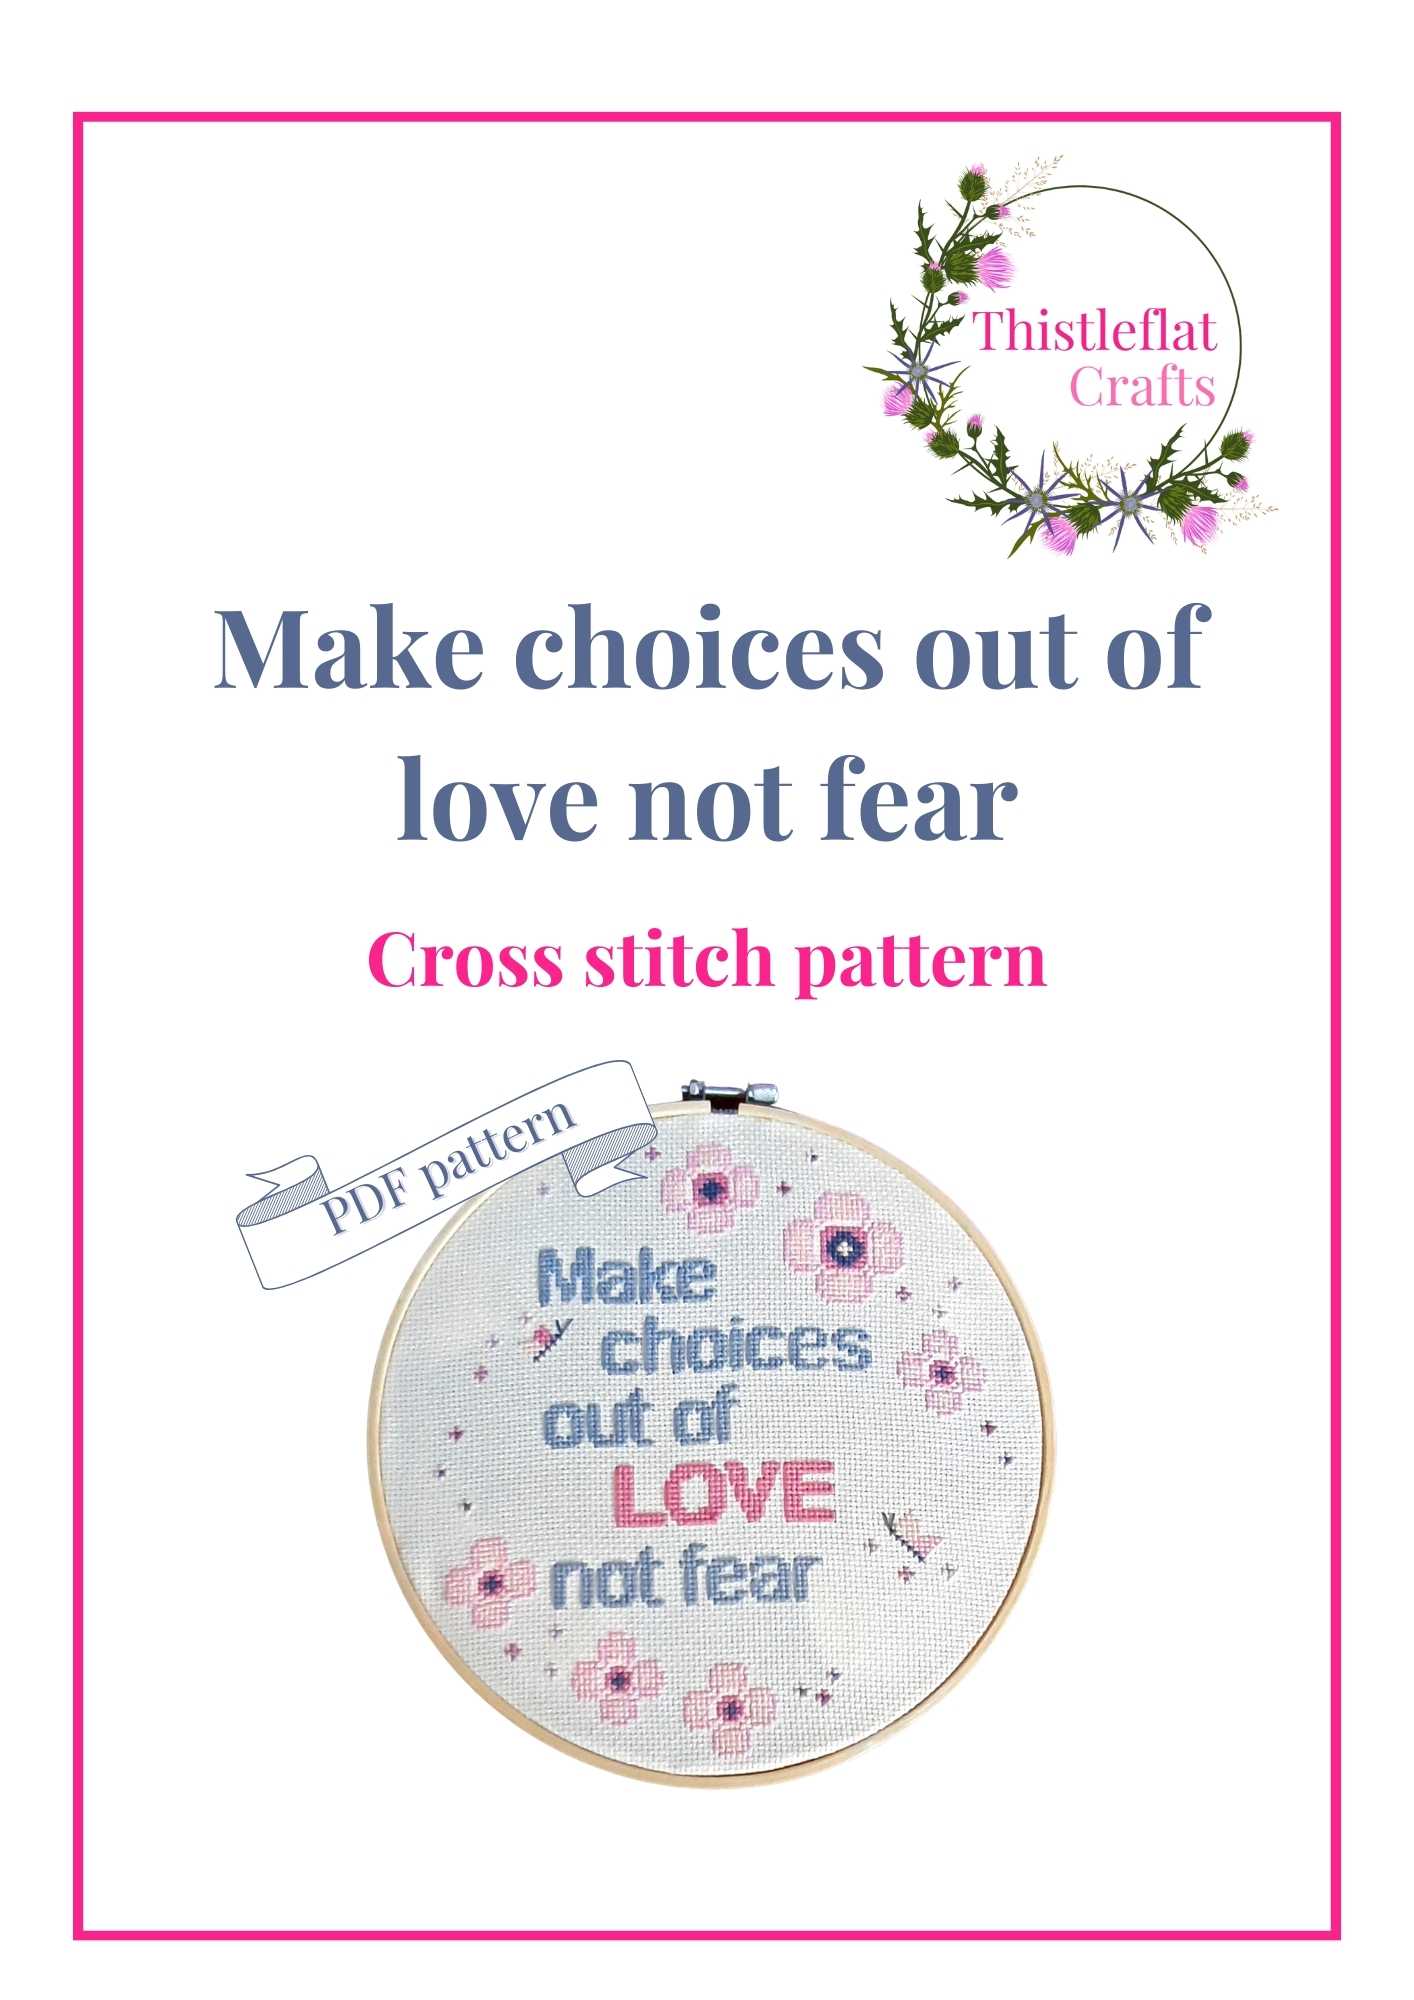 Make choices out of love not fear, cross stitch pattern pdf, immediate download - Thistleflat Crafts